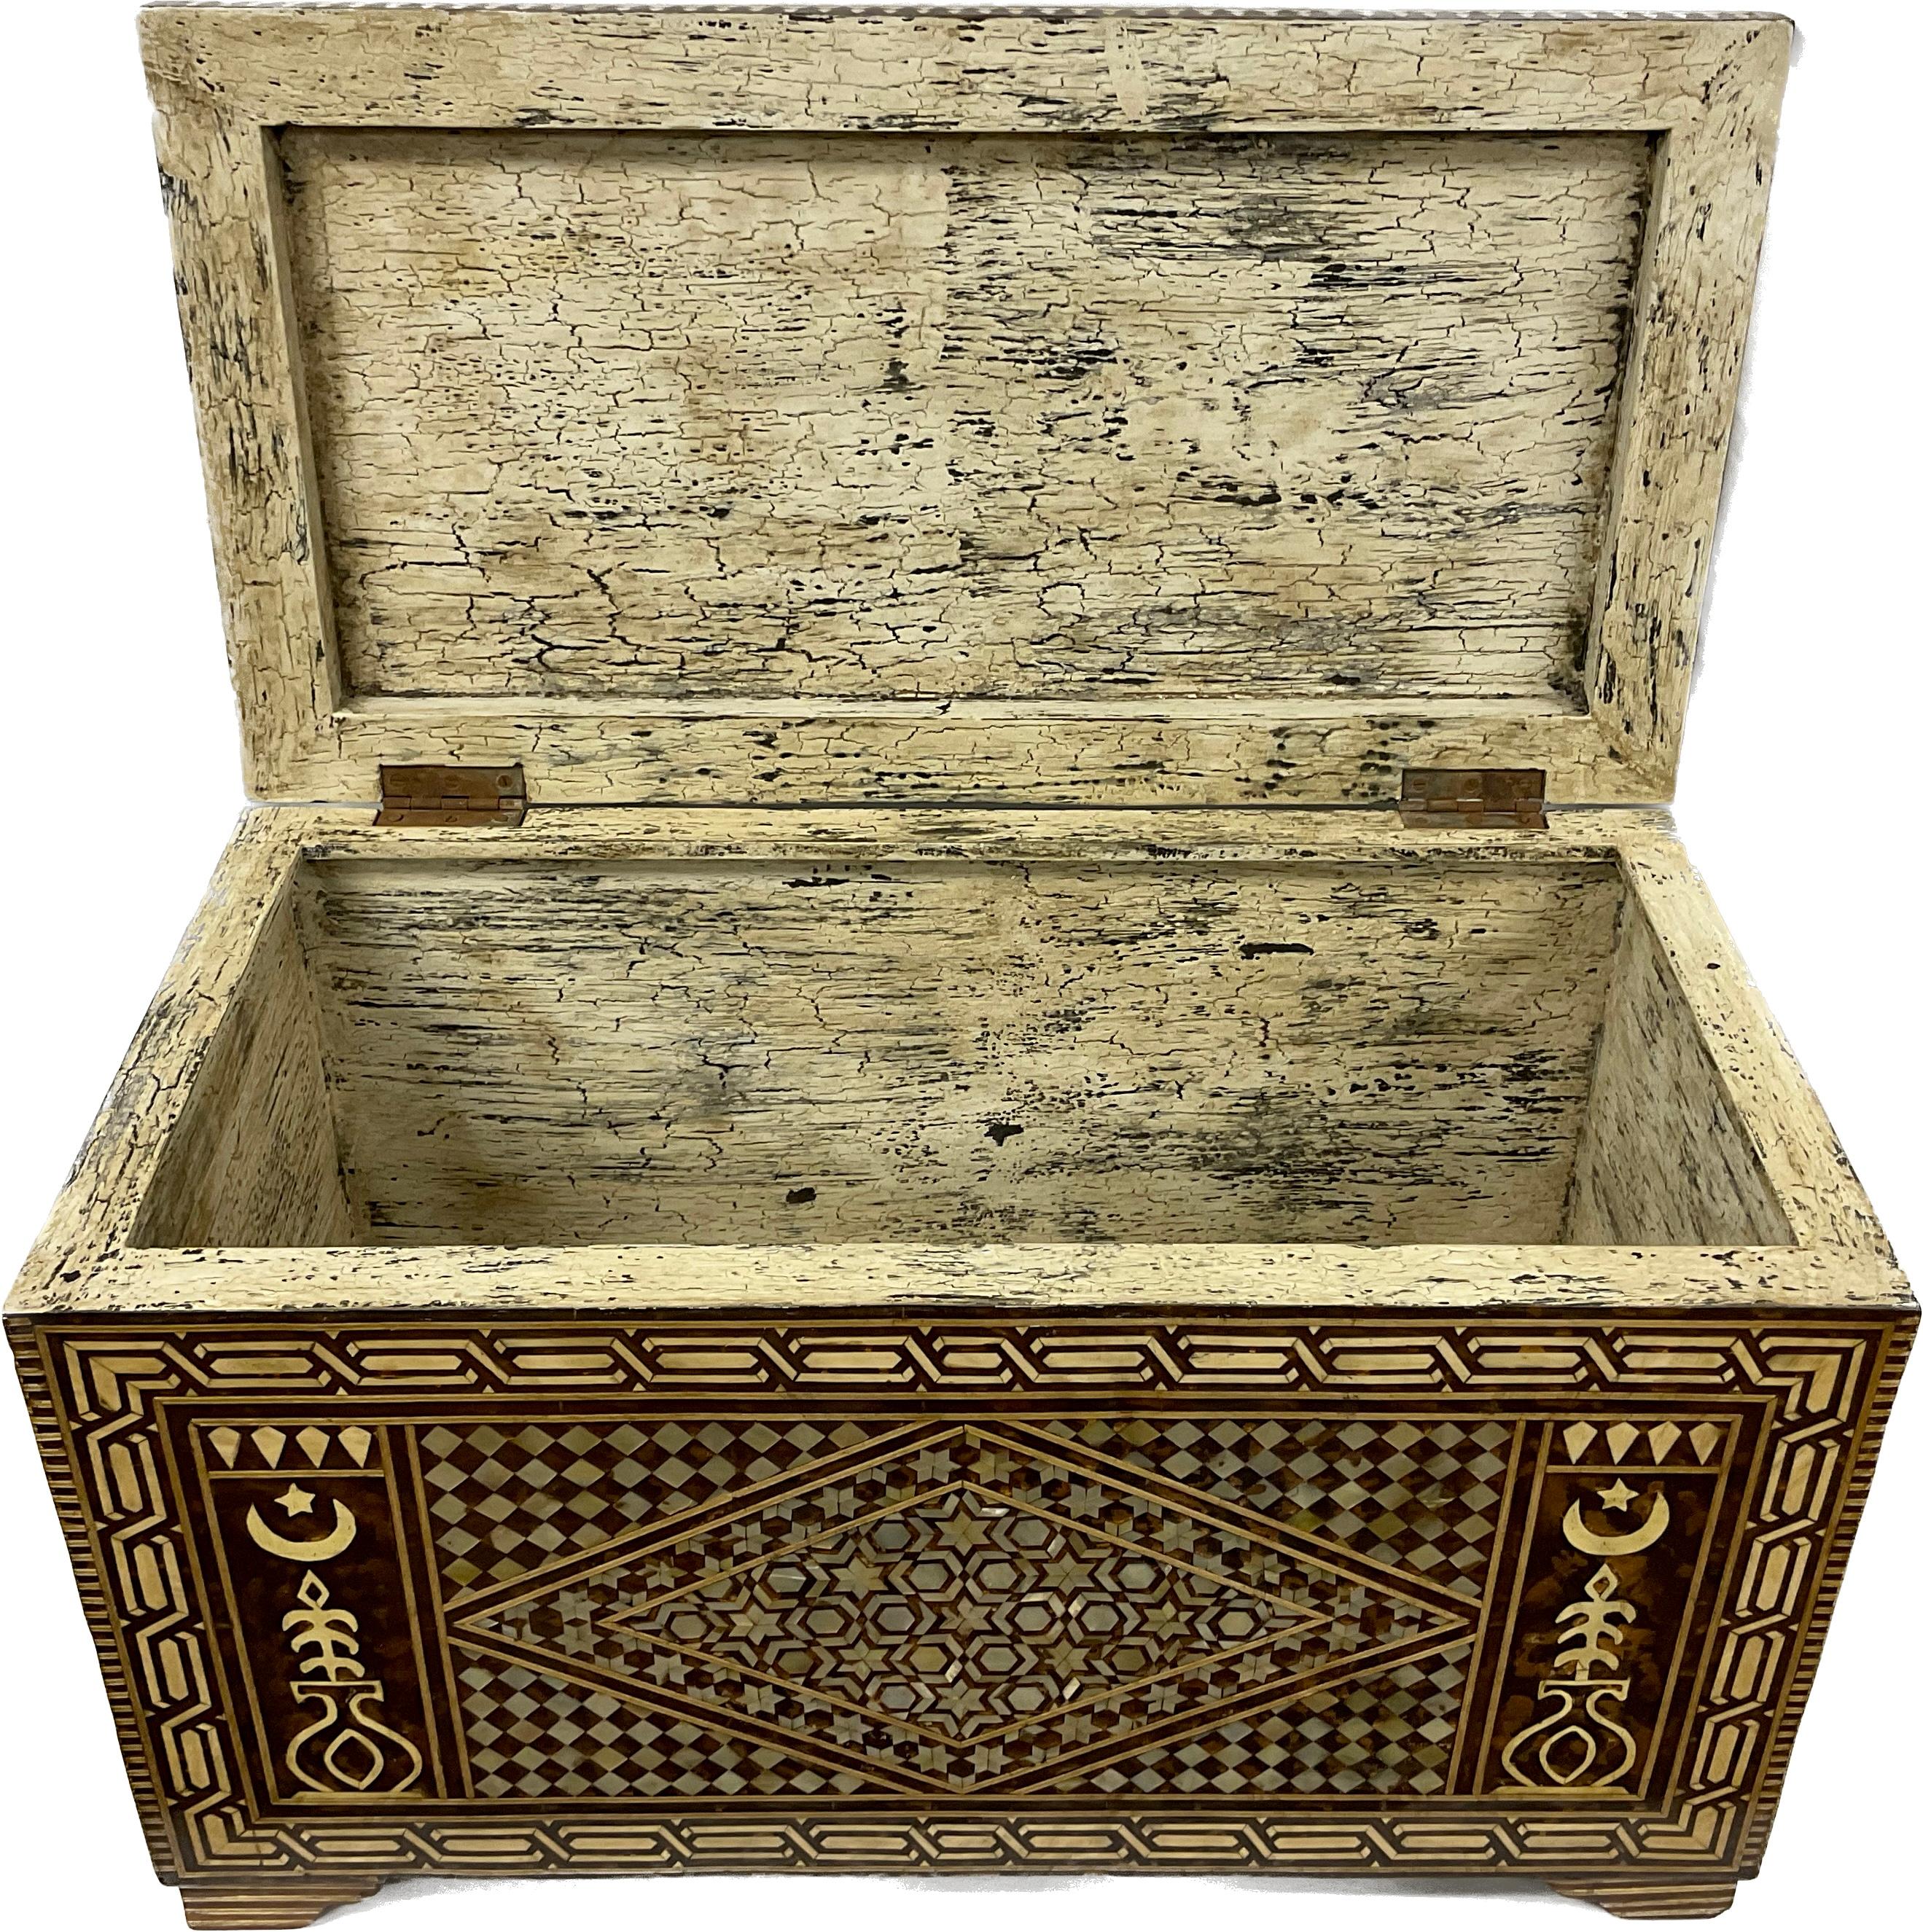 Large Middle Eastern Moorish Turkish Mother-of-pearl Inlaid Chest For Sale 1